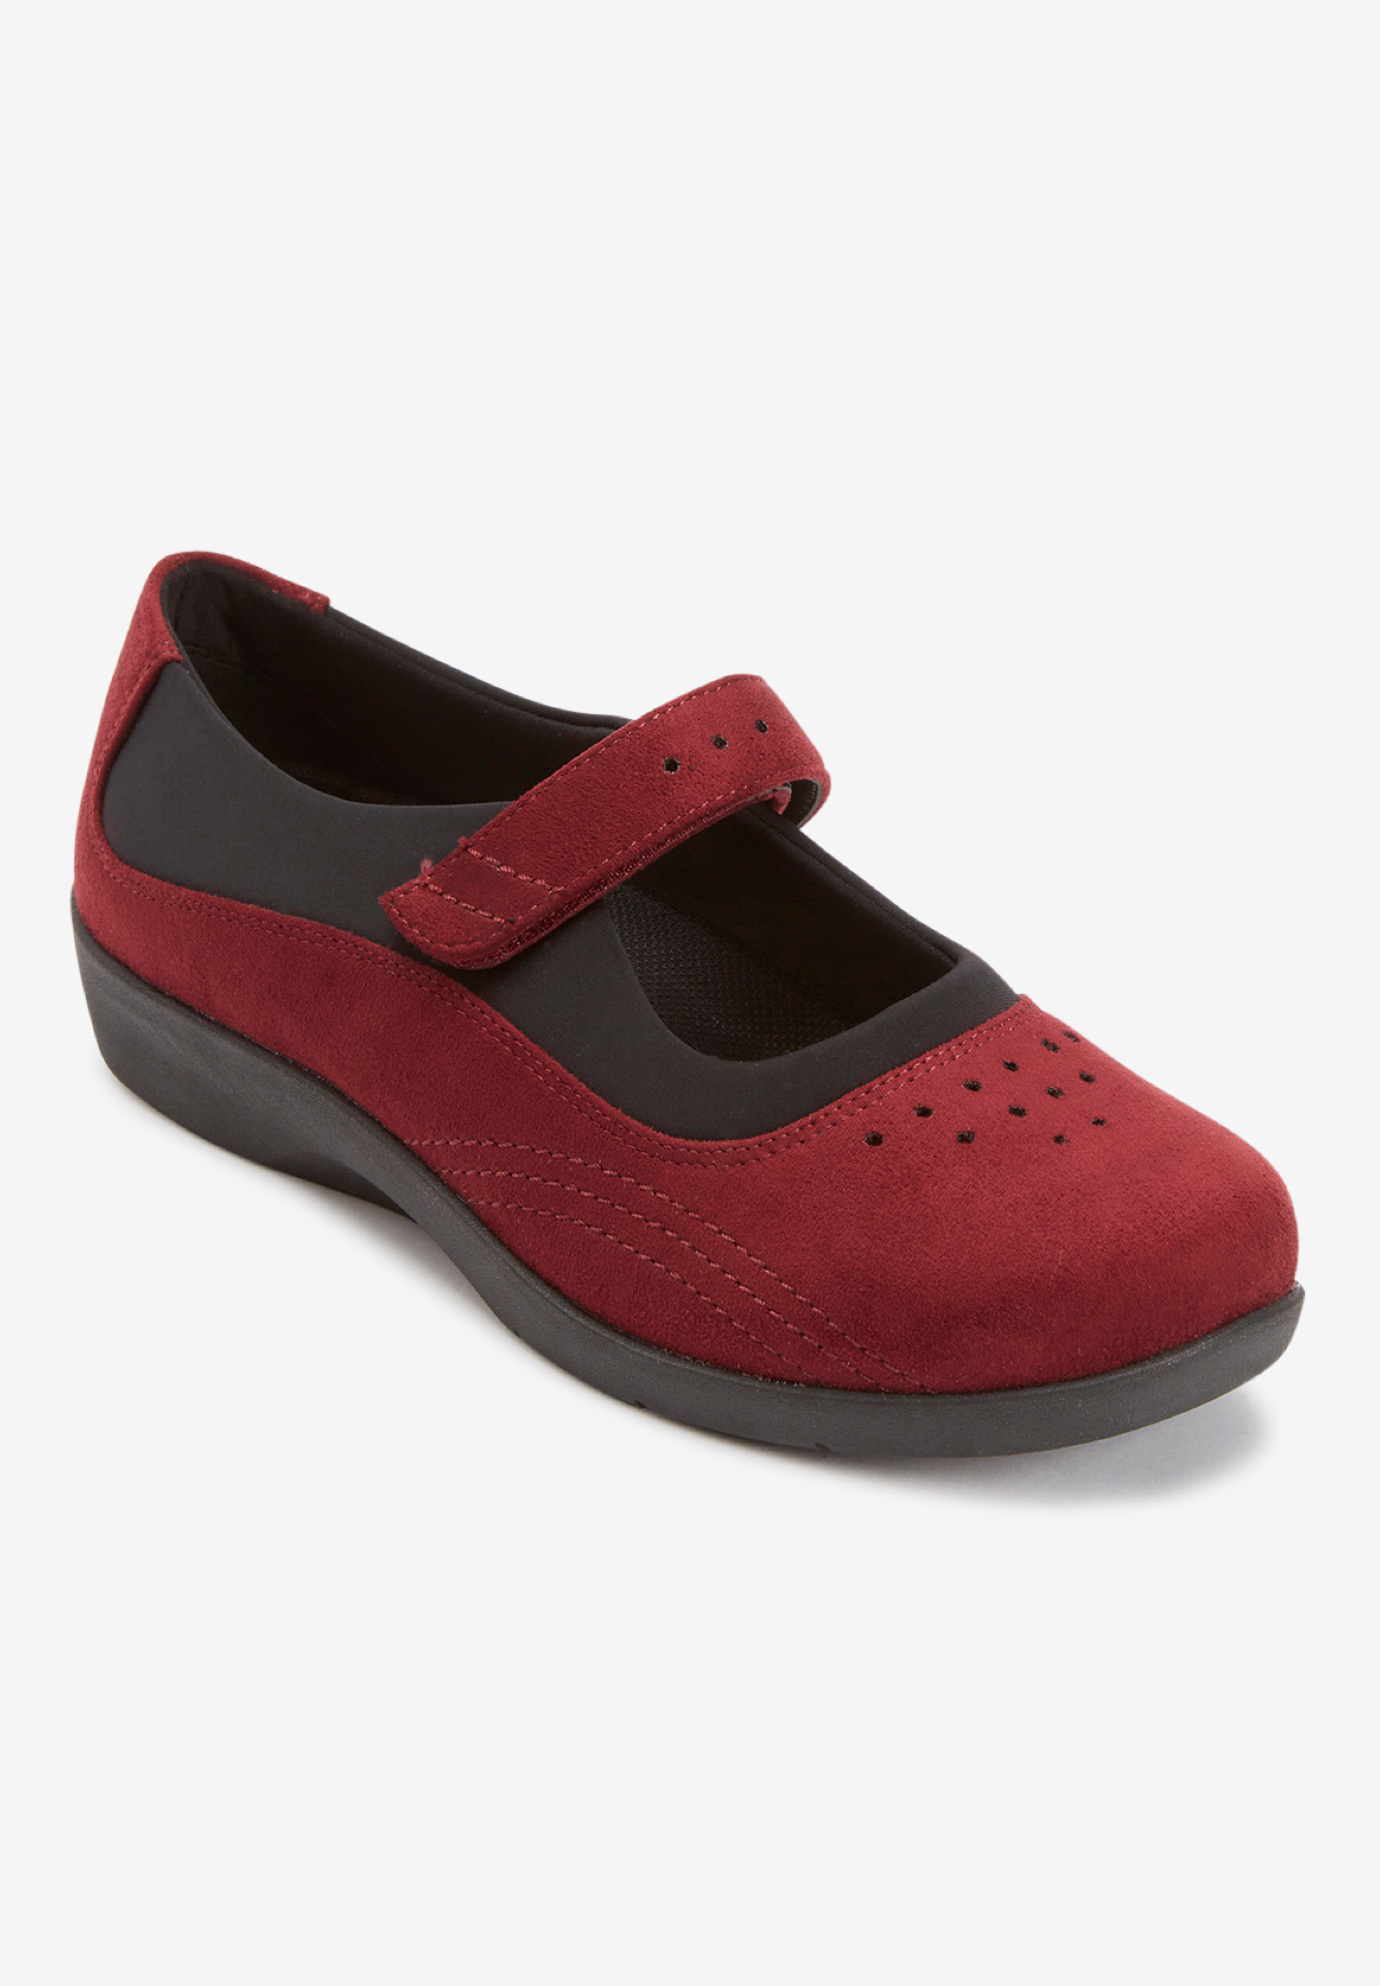 The Aliana Flat by Comfortview, 